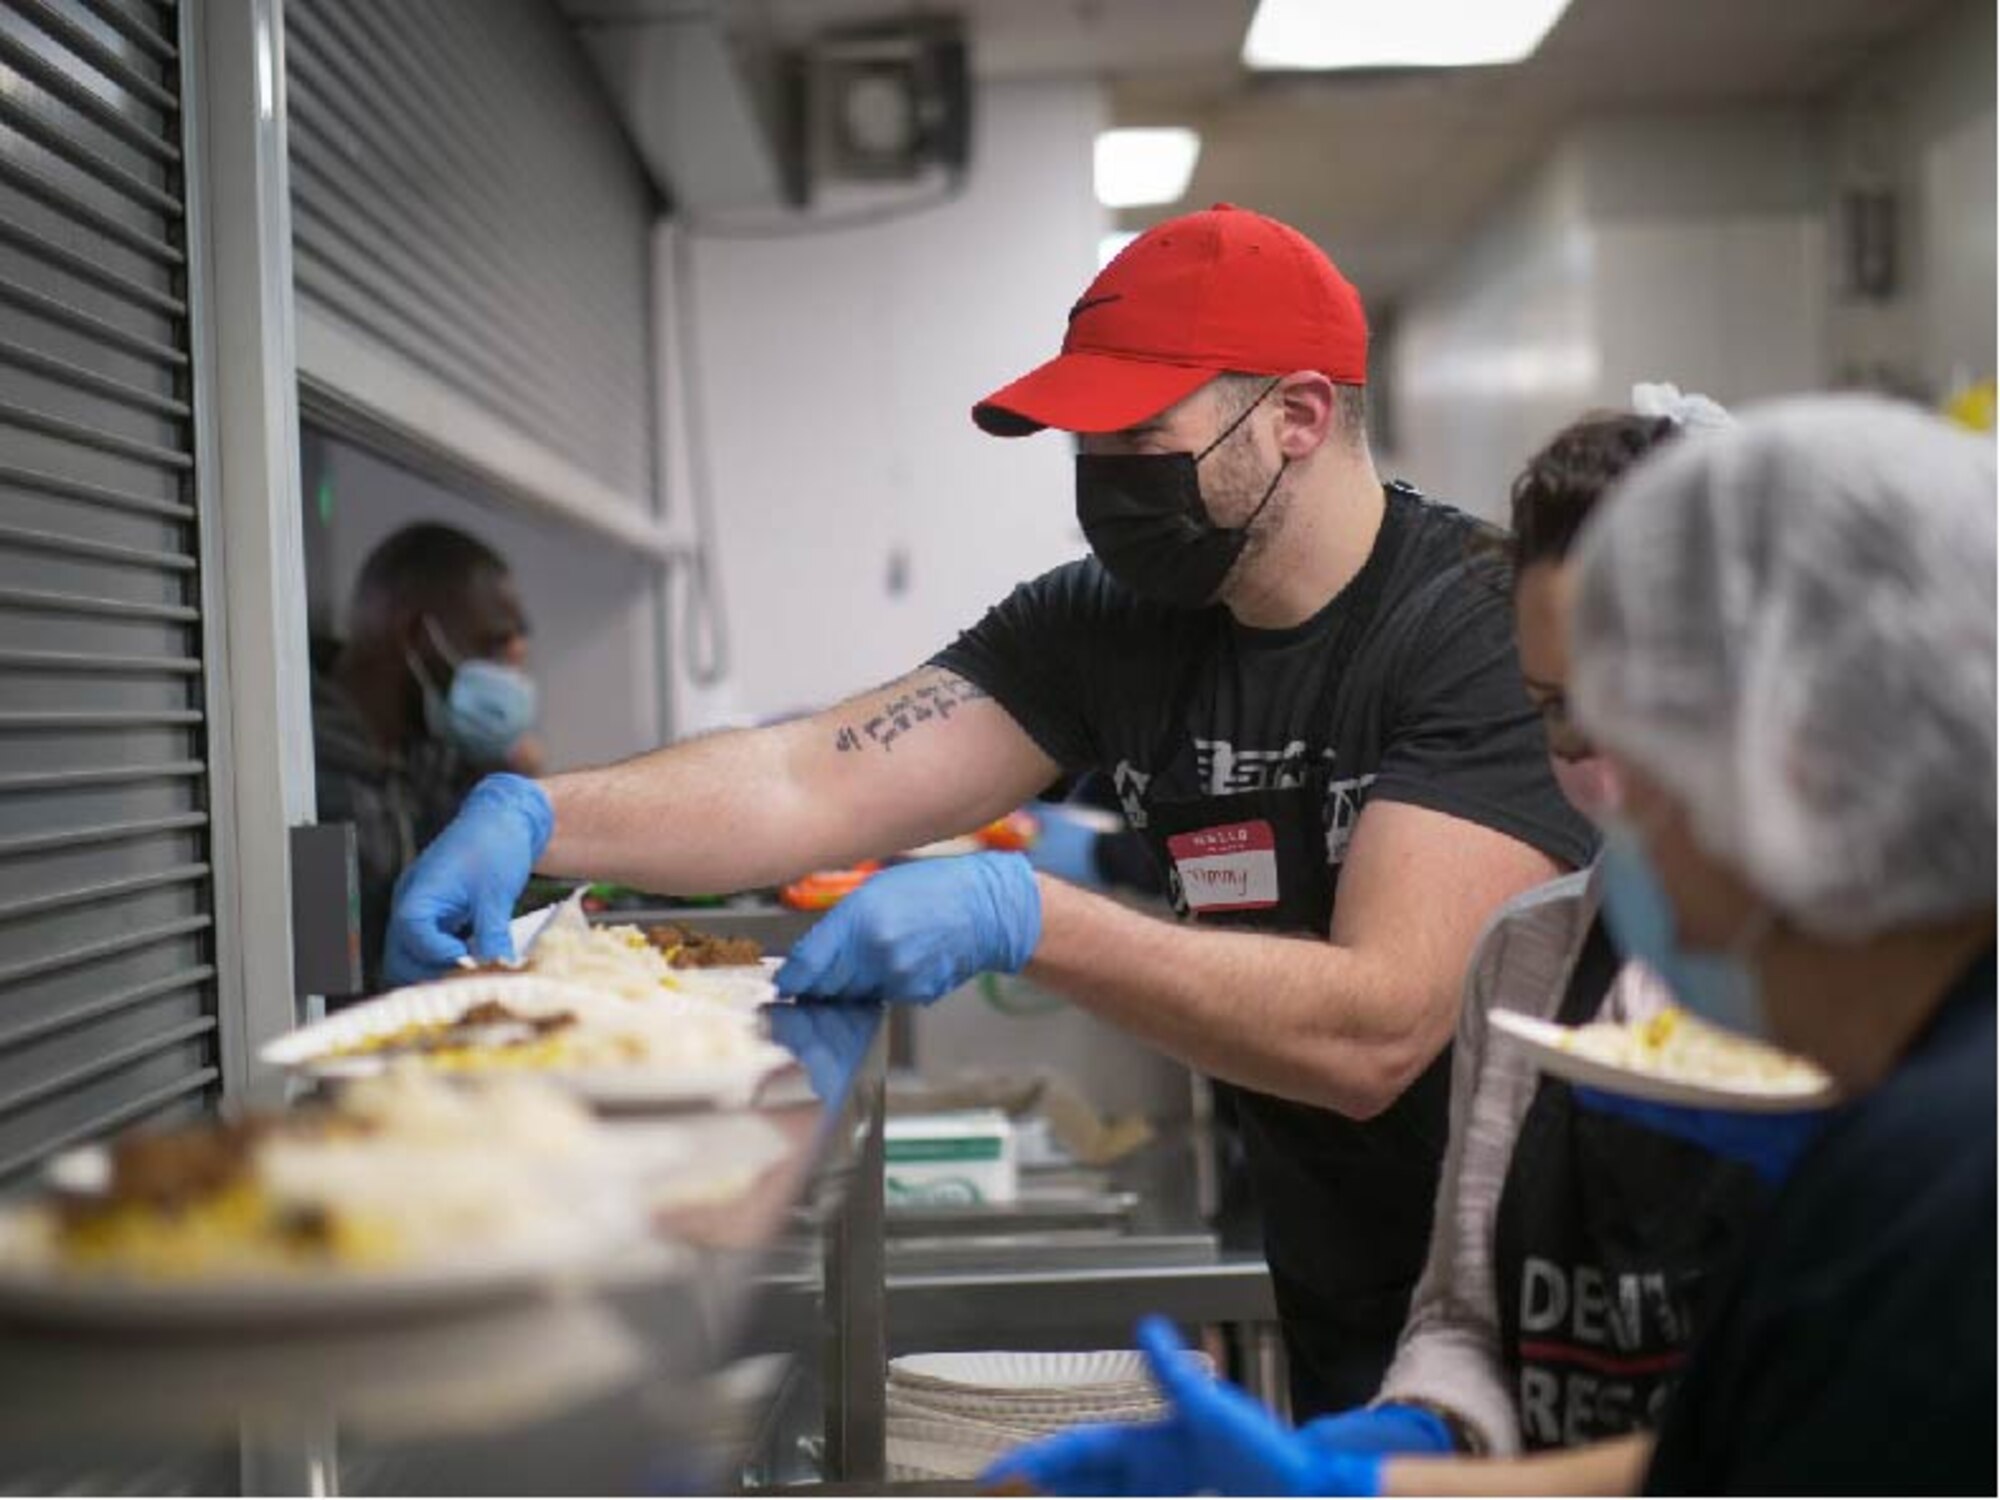 U.S. Air Force Staff Sgt. Jimmy Mrosko, an Air Guard Reserve assignment technician at Headquarters Air Reserve Personnel Center, prepares meals at Denver Rescue Mission Feb. 21, 2021, in Denver, Colo. Mrosko said, “these people are going through hard times, but I see the joy in their spirit.” (U.S. Air Force photo by Master Sgt. Leisa Grant/Released)